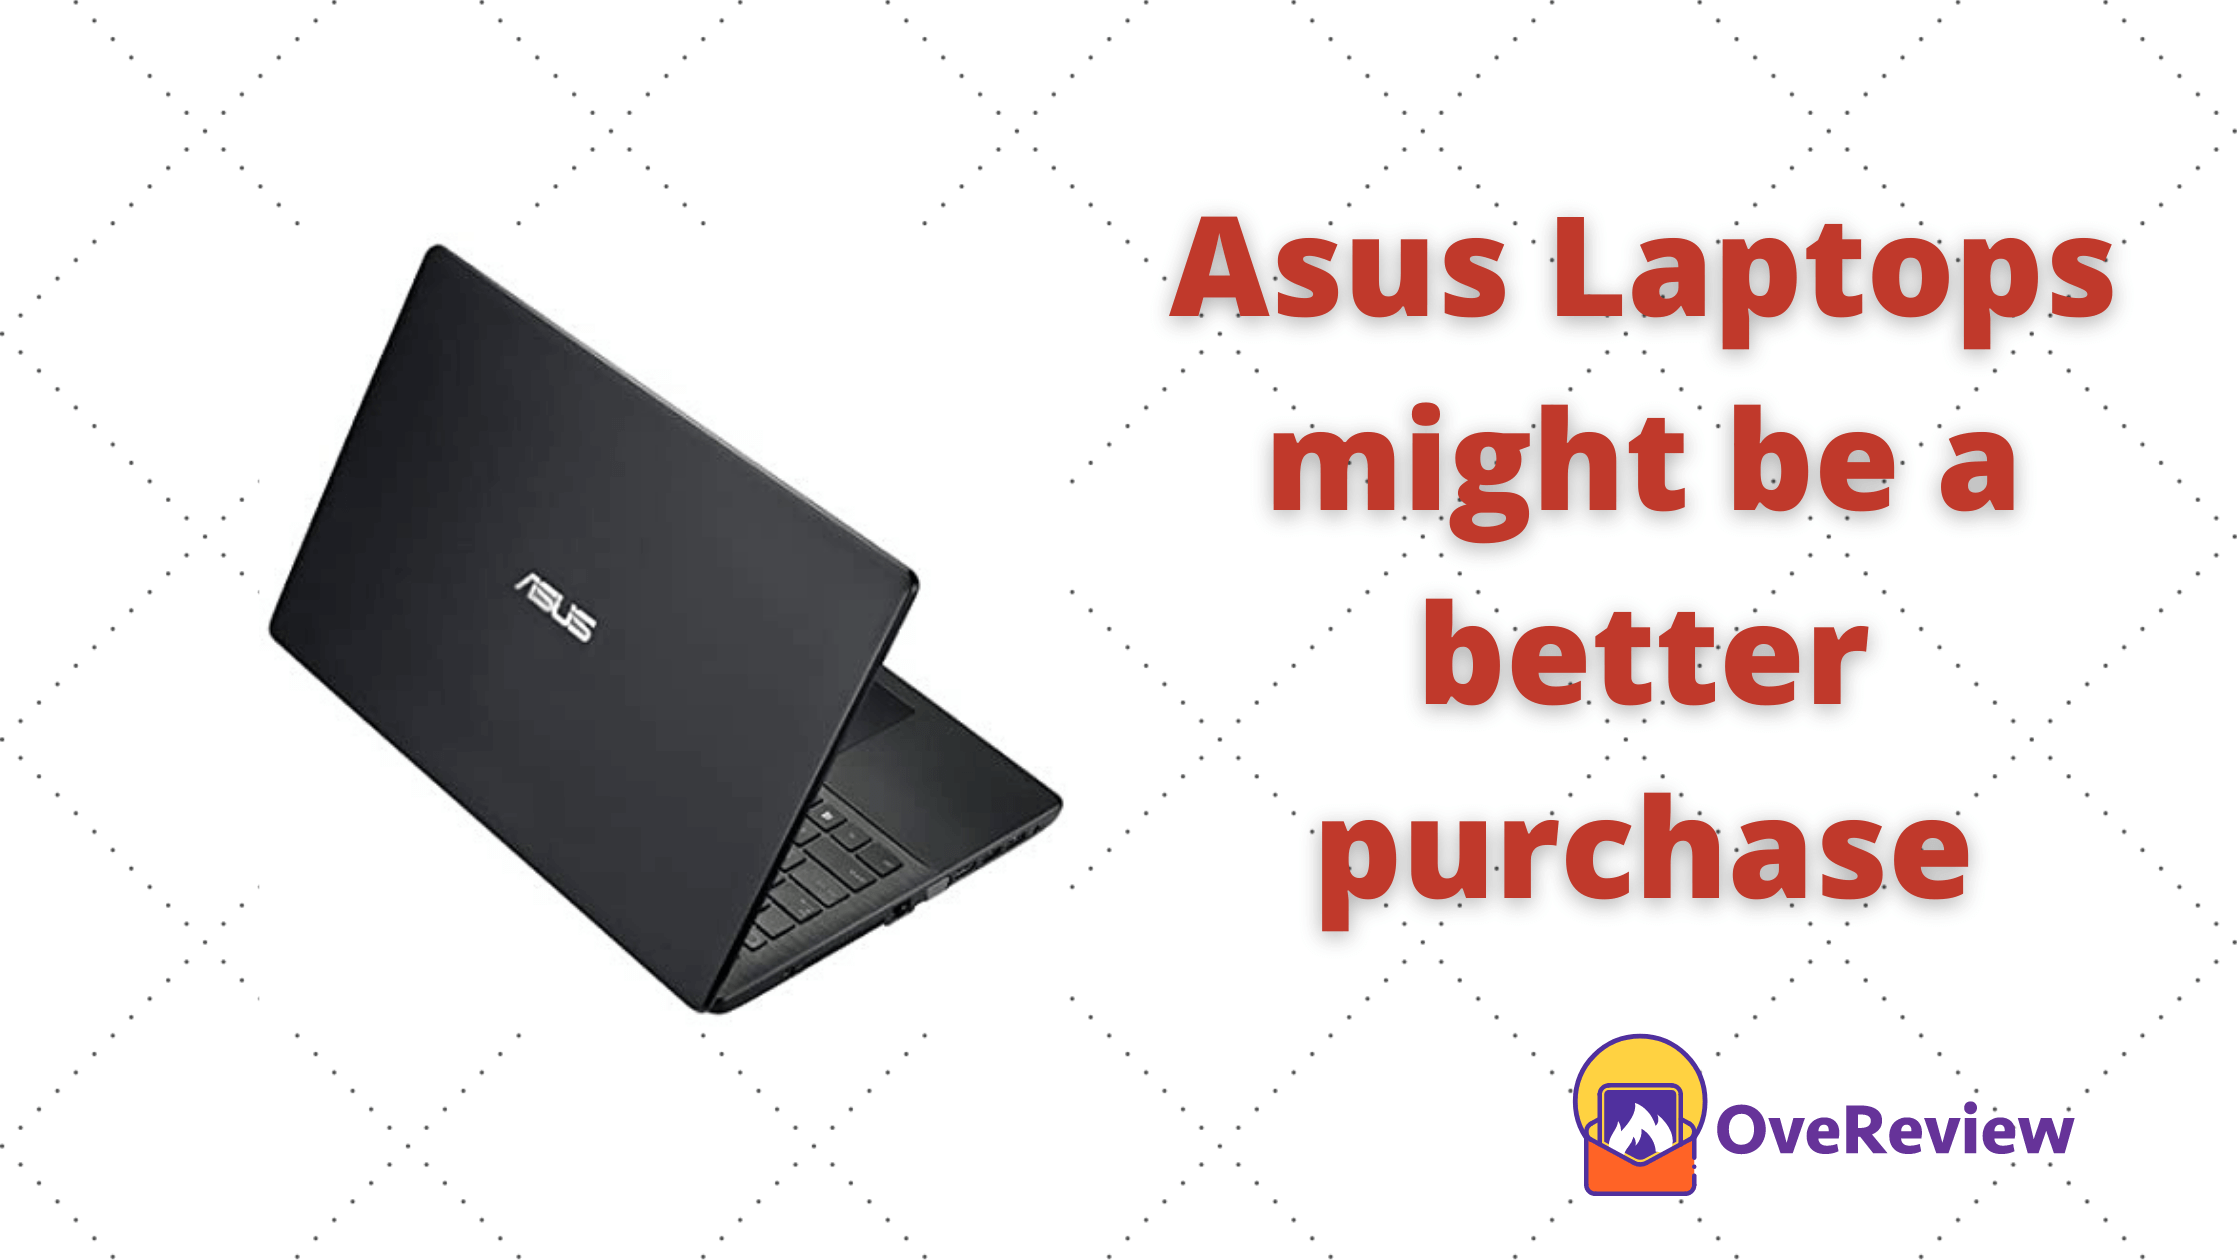 Here’s Betterment or Enhancement to Asus Laptops might be a better purchase 1